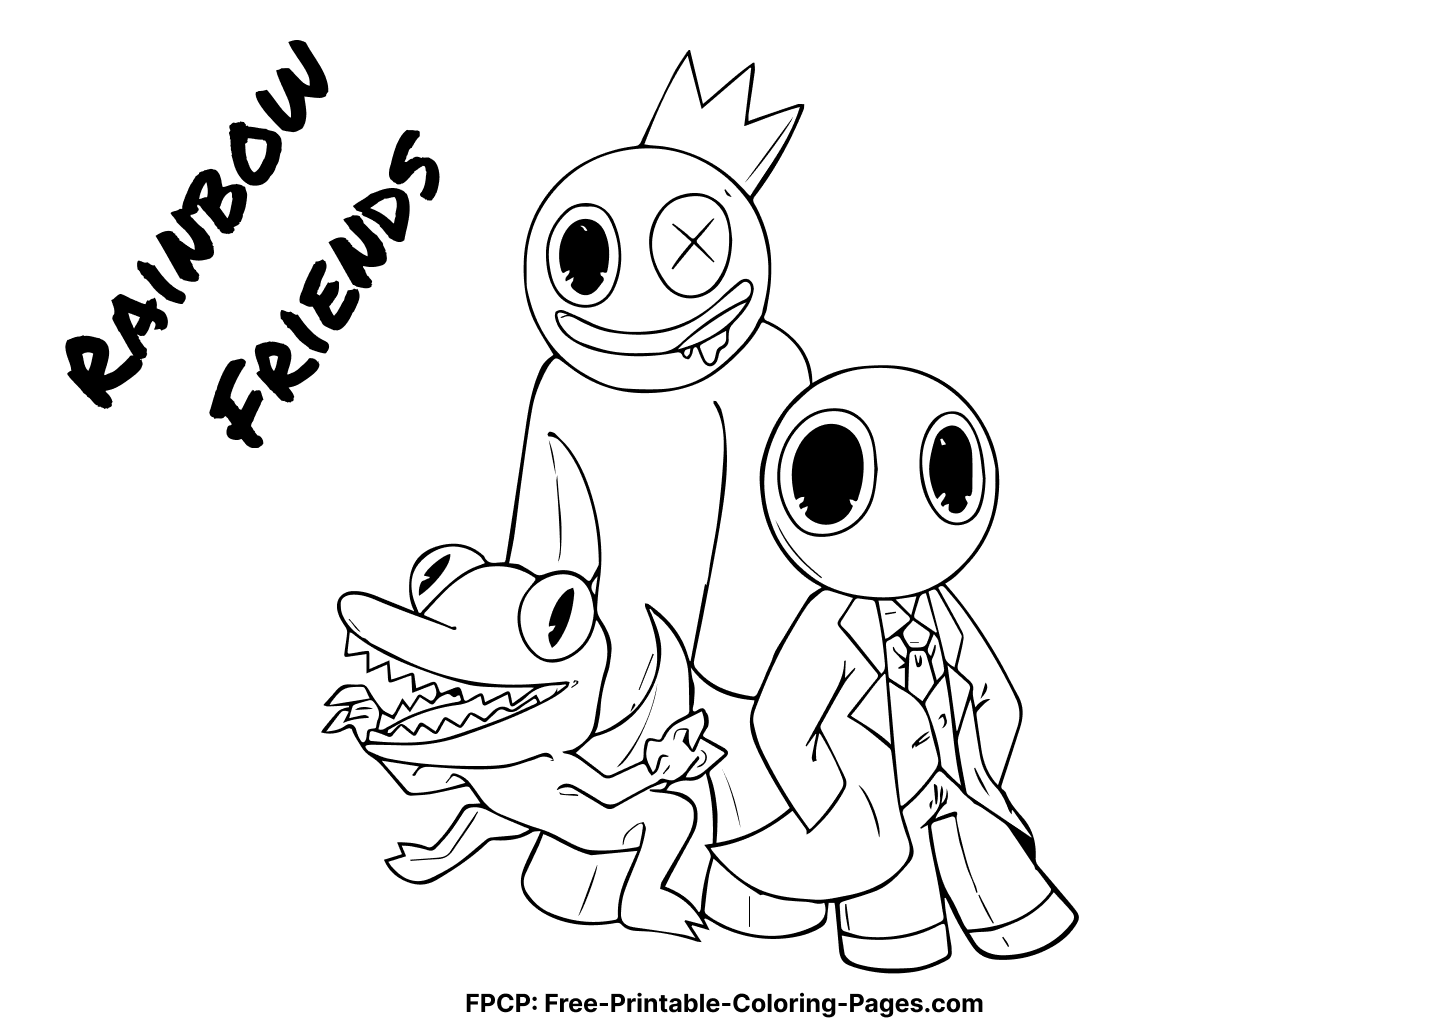 33 Rainbow Friends Coloring Pages In PDF For Printing - Coloring pages ...